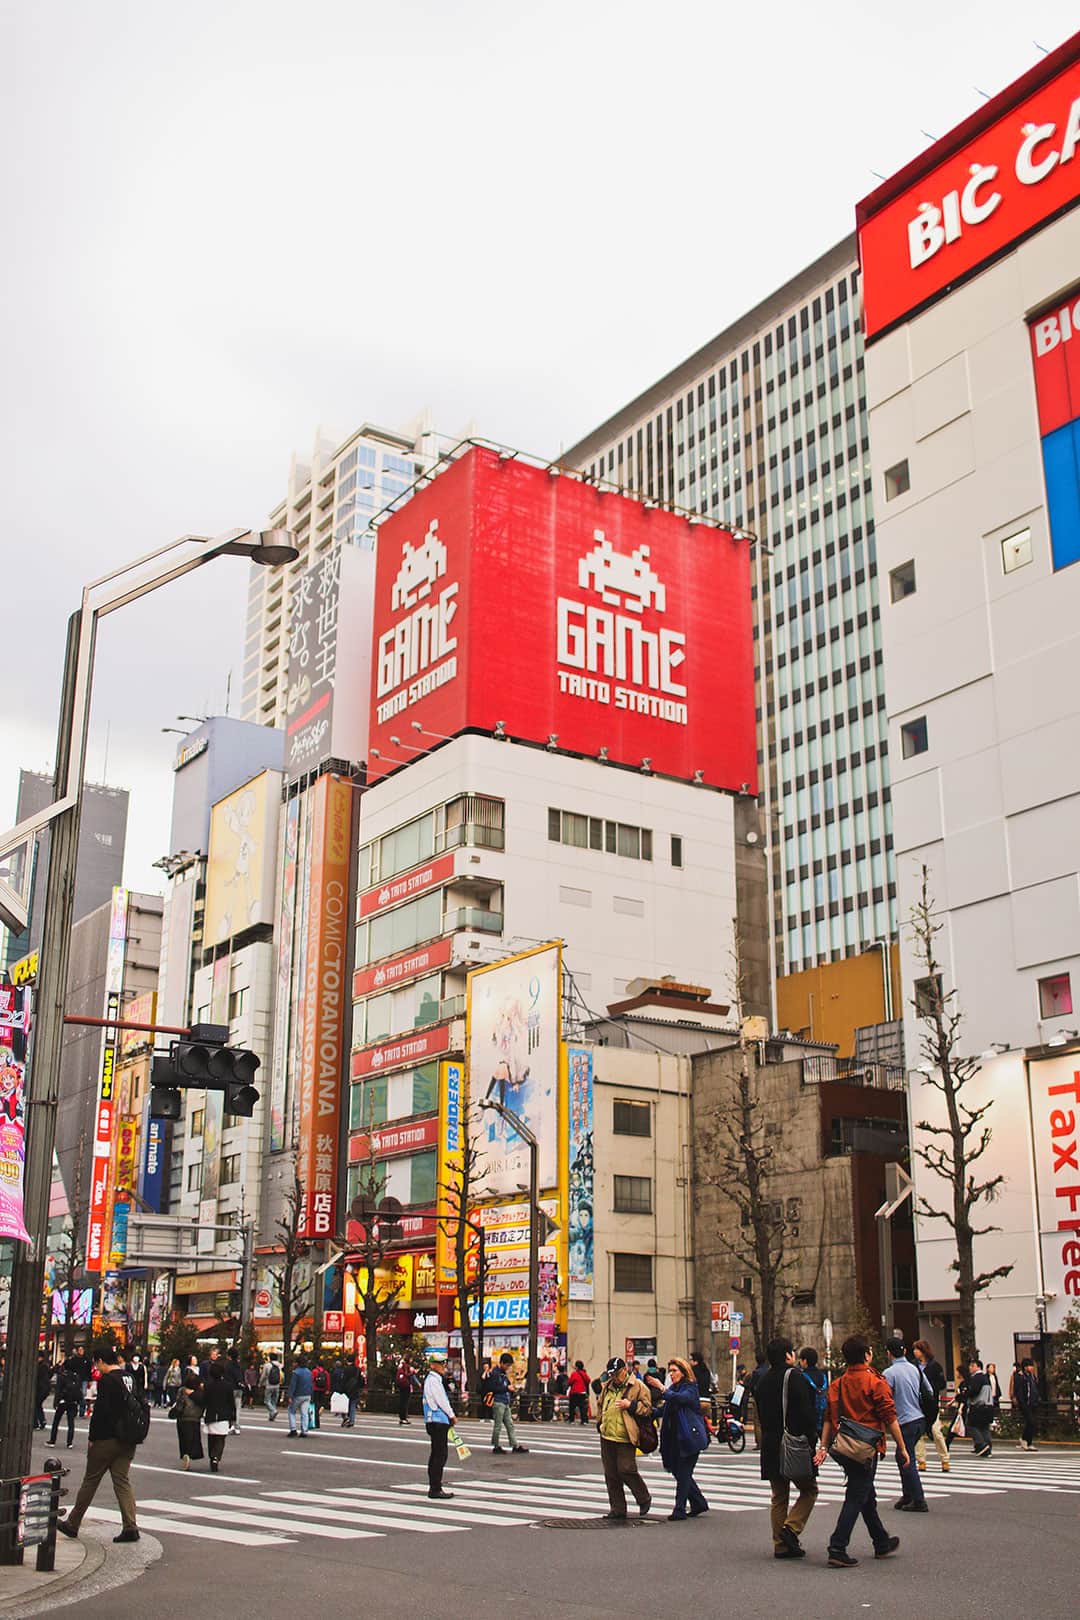 Experience a Taito Game Station + 15 Amazing Things to Do in Tokyo Japan